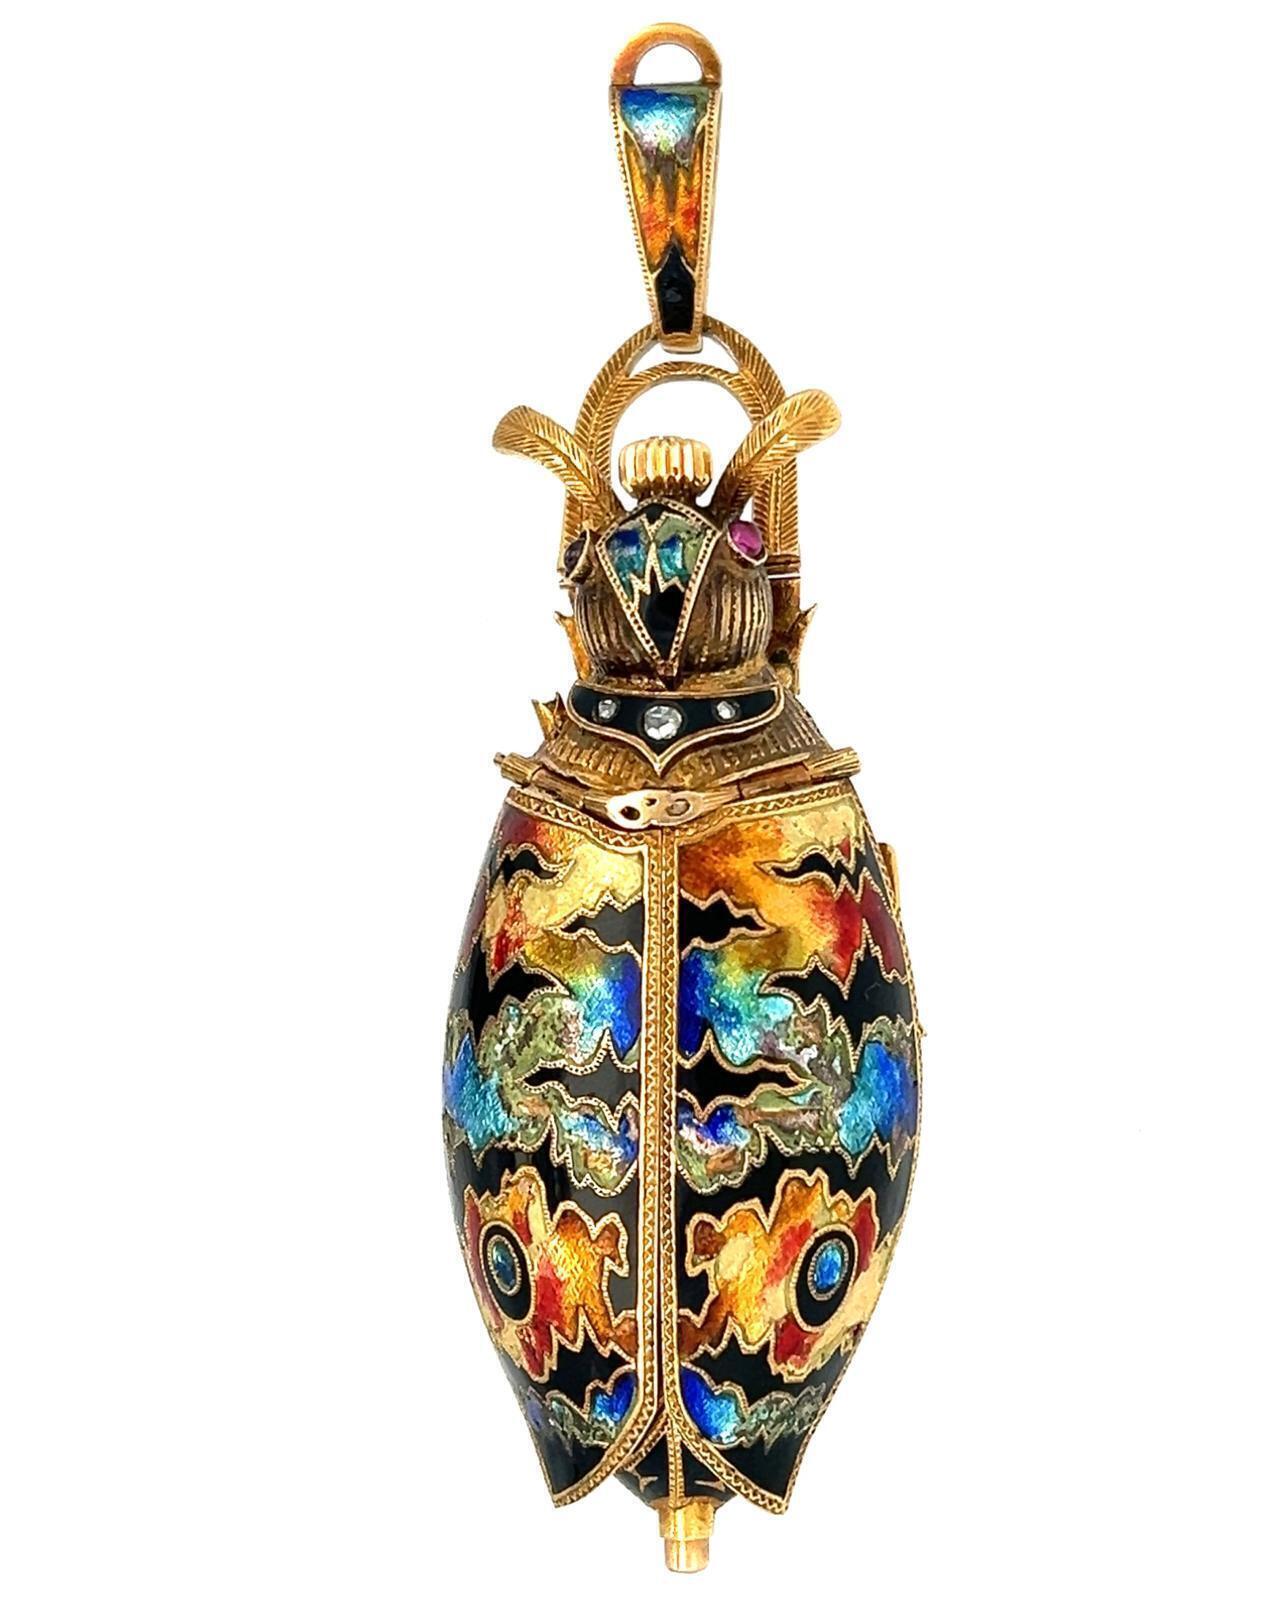 18K GOLD AND ENAMEL SCARAB BEETLE FORM WATCH, CIRCA 1880